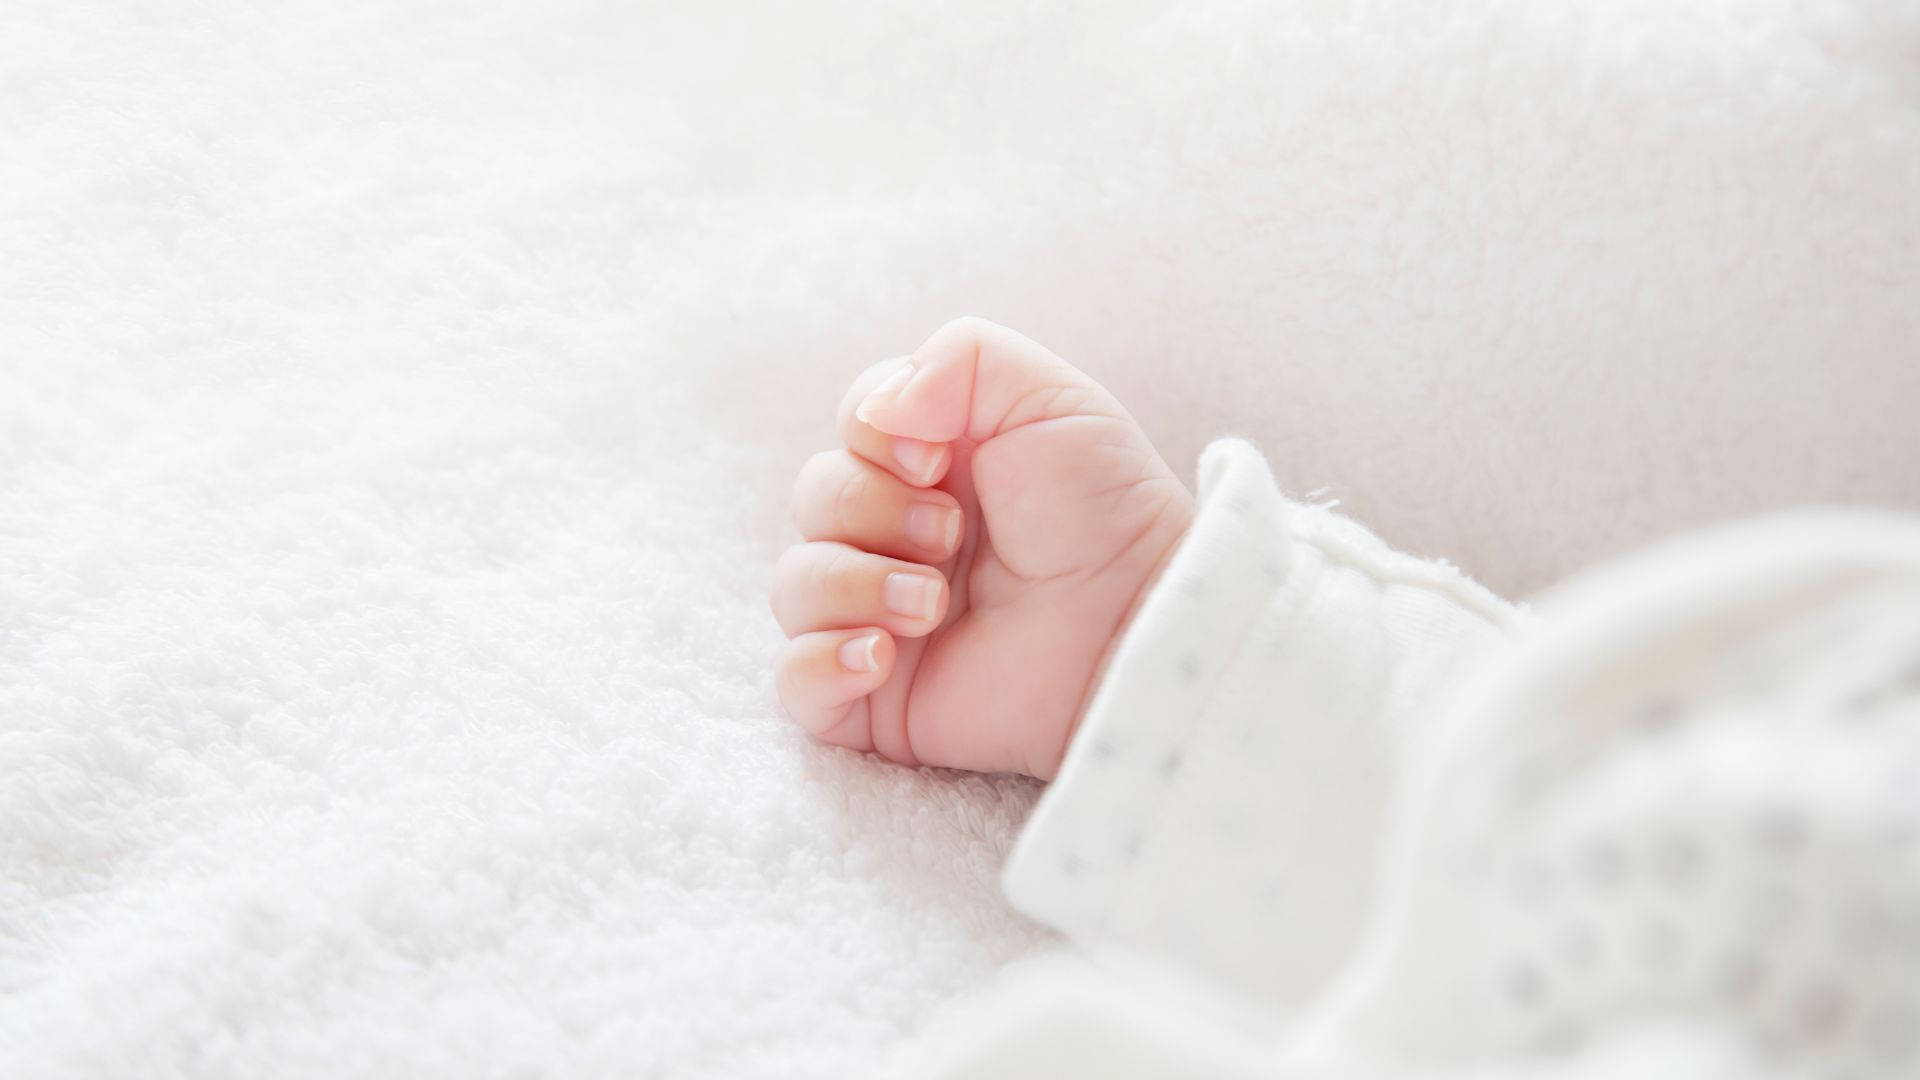 Baby Hand Closed Into A Fist Wallpaper